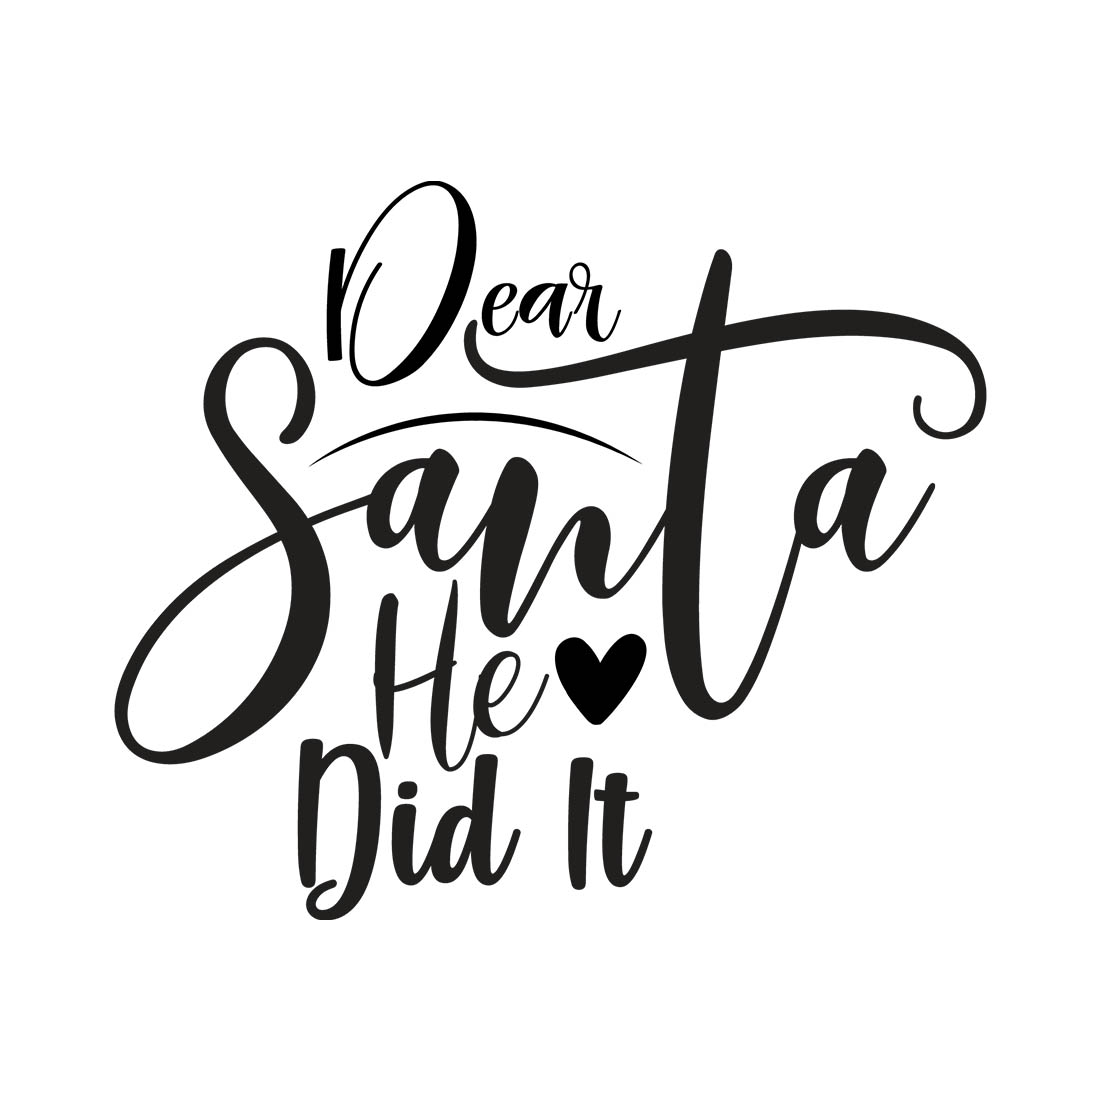 Image with irresistible black lettering for prints Dear Santa He Did It.